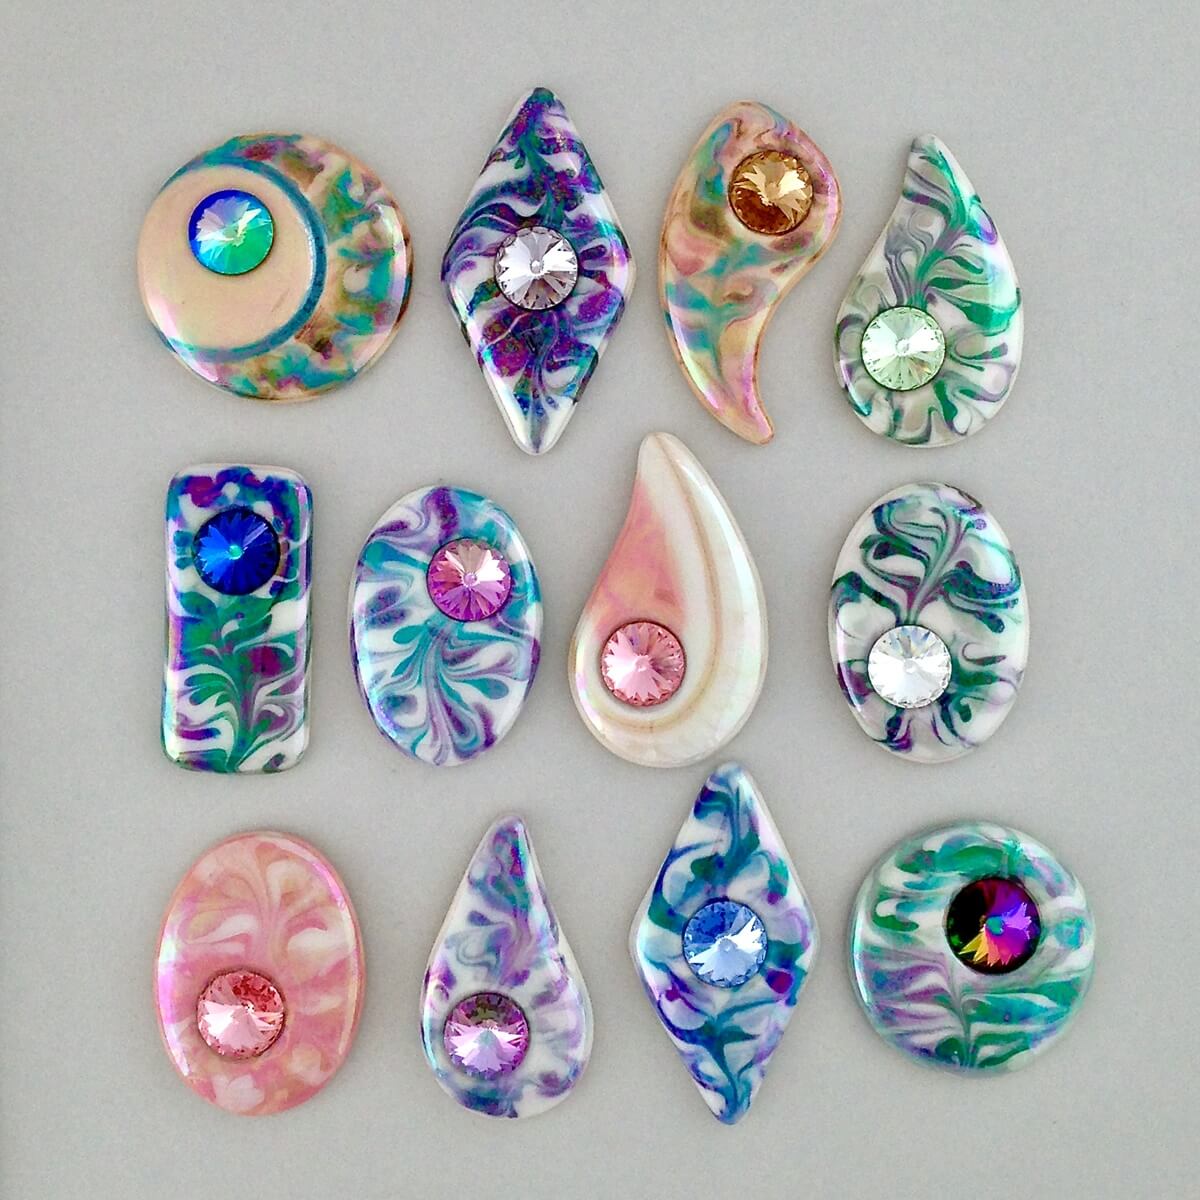 Porcelain cabochons with Swarovski crystal accents.